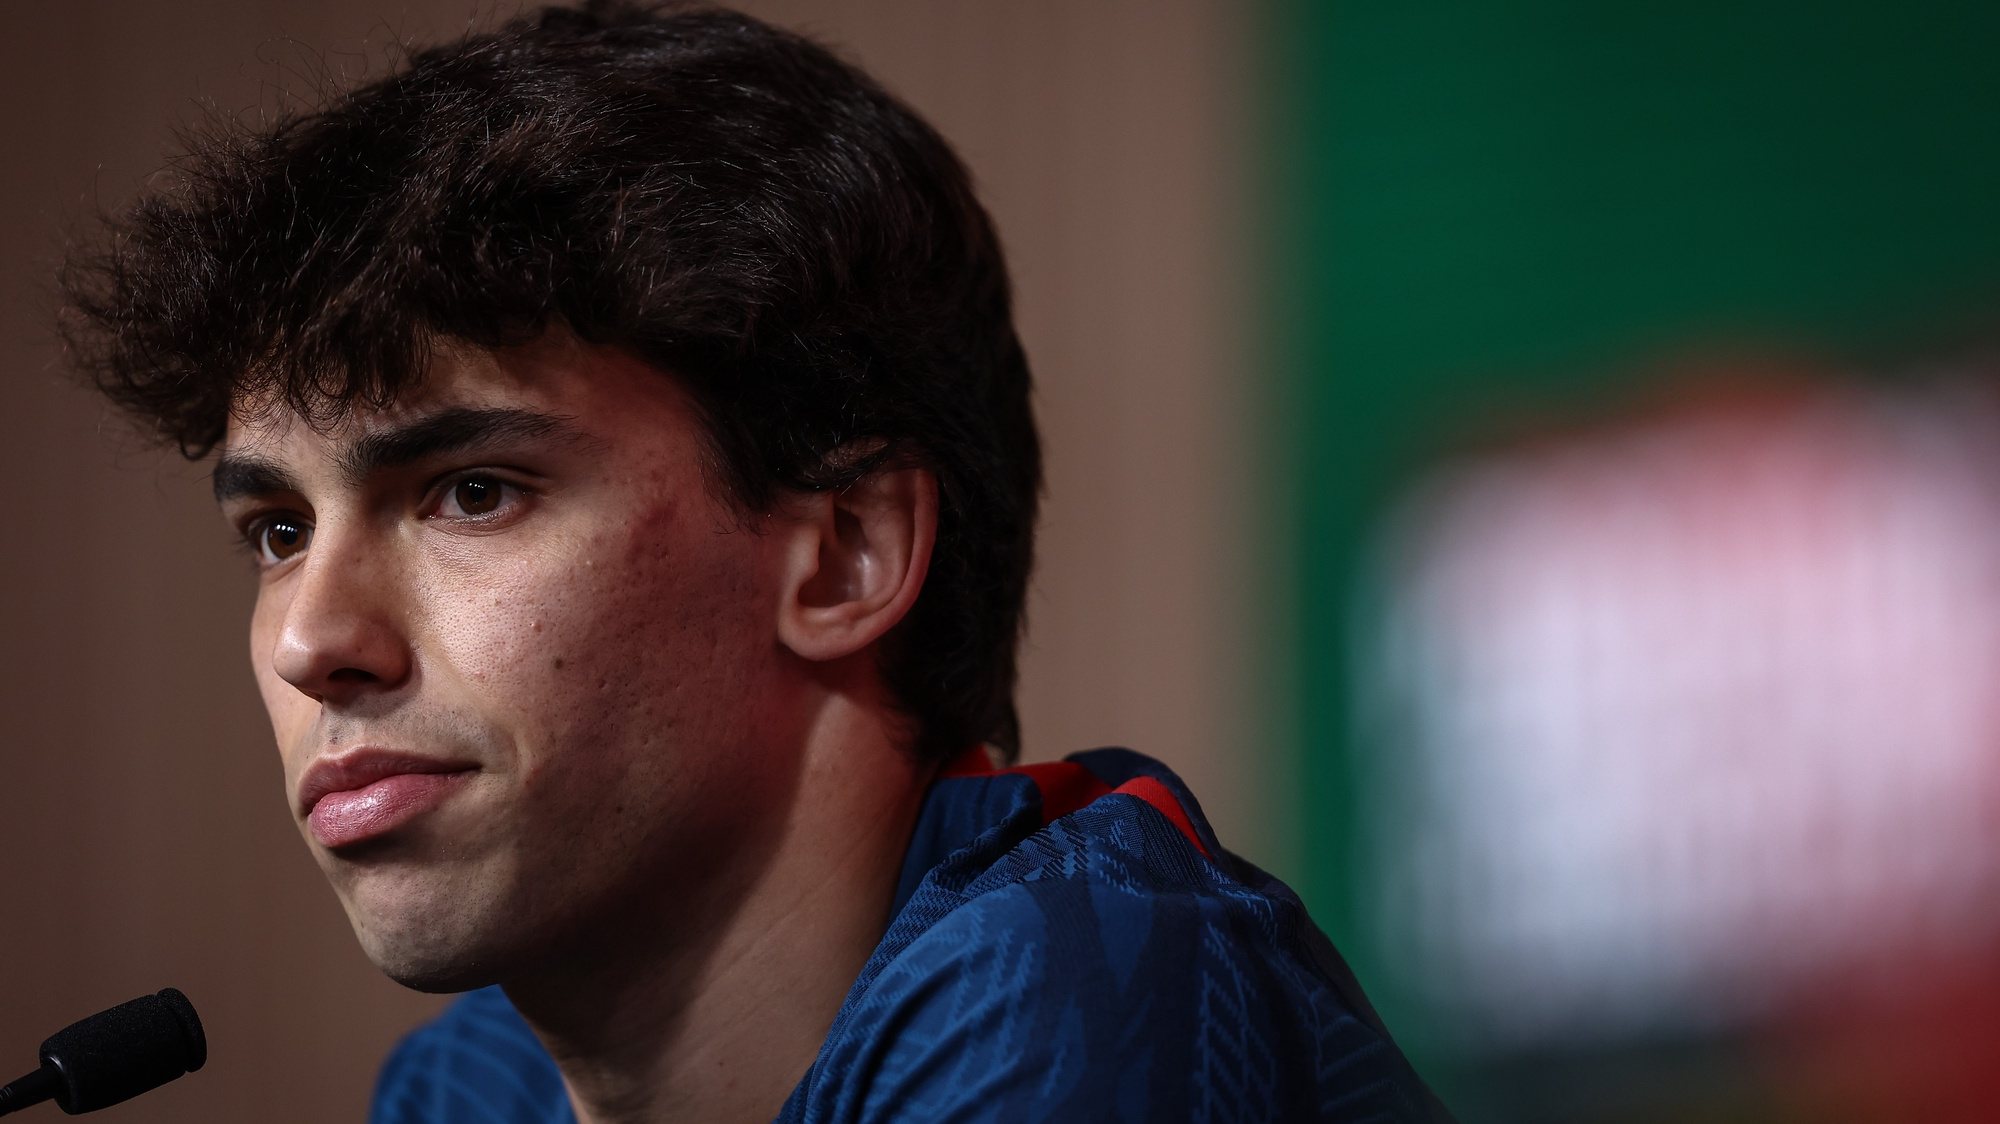 Portugal soccer team player João Felix attends a press conference at Cidade do Futebol in Oeiras, outskirts of Lisbon, Portugal, 21 March 2023. Portugal will play his Euro 2024 Group J qualifying soccer match with Liechtenstein next Thursday at Alvalade Stadium in Lisbon. RODRIGO ANTUNES/LUSA